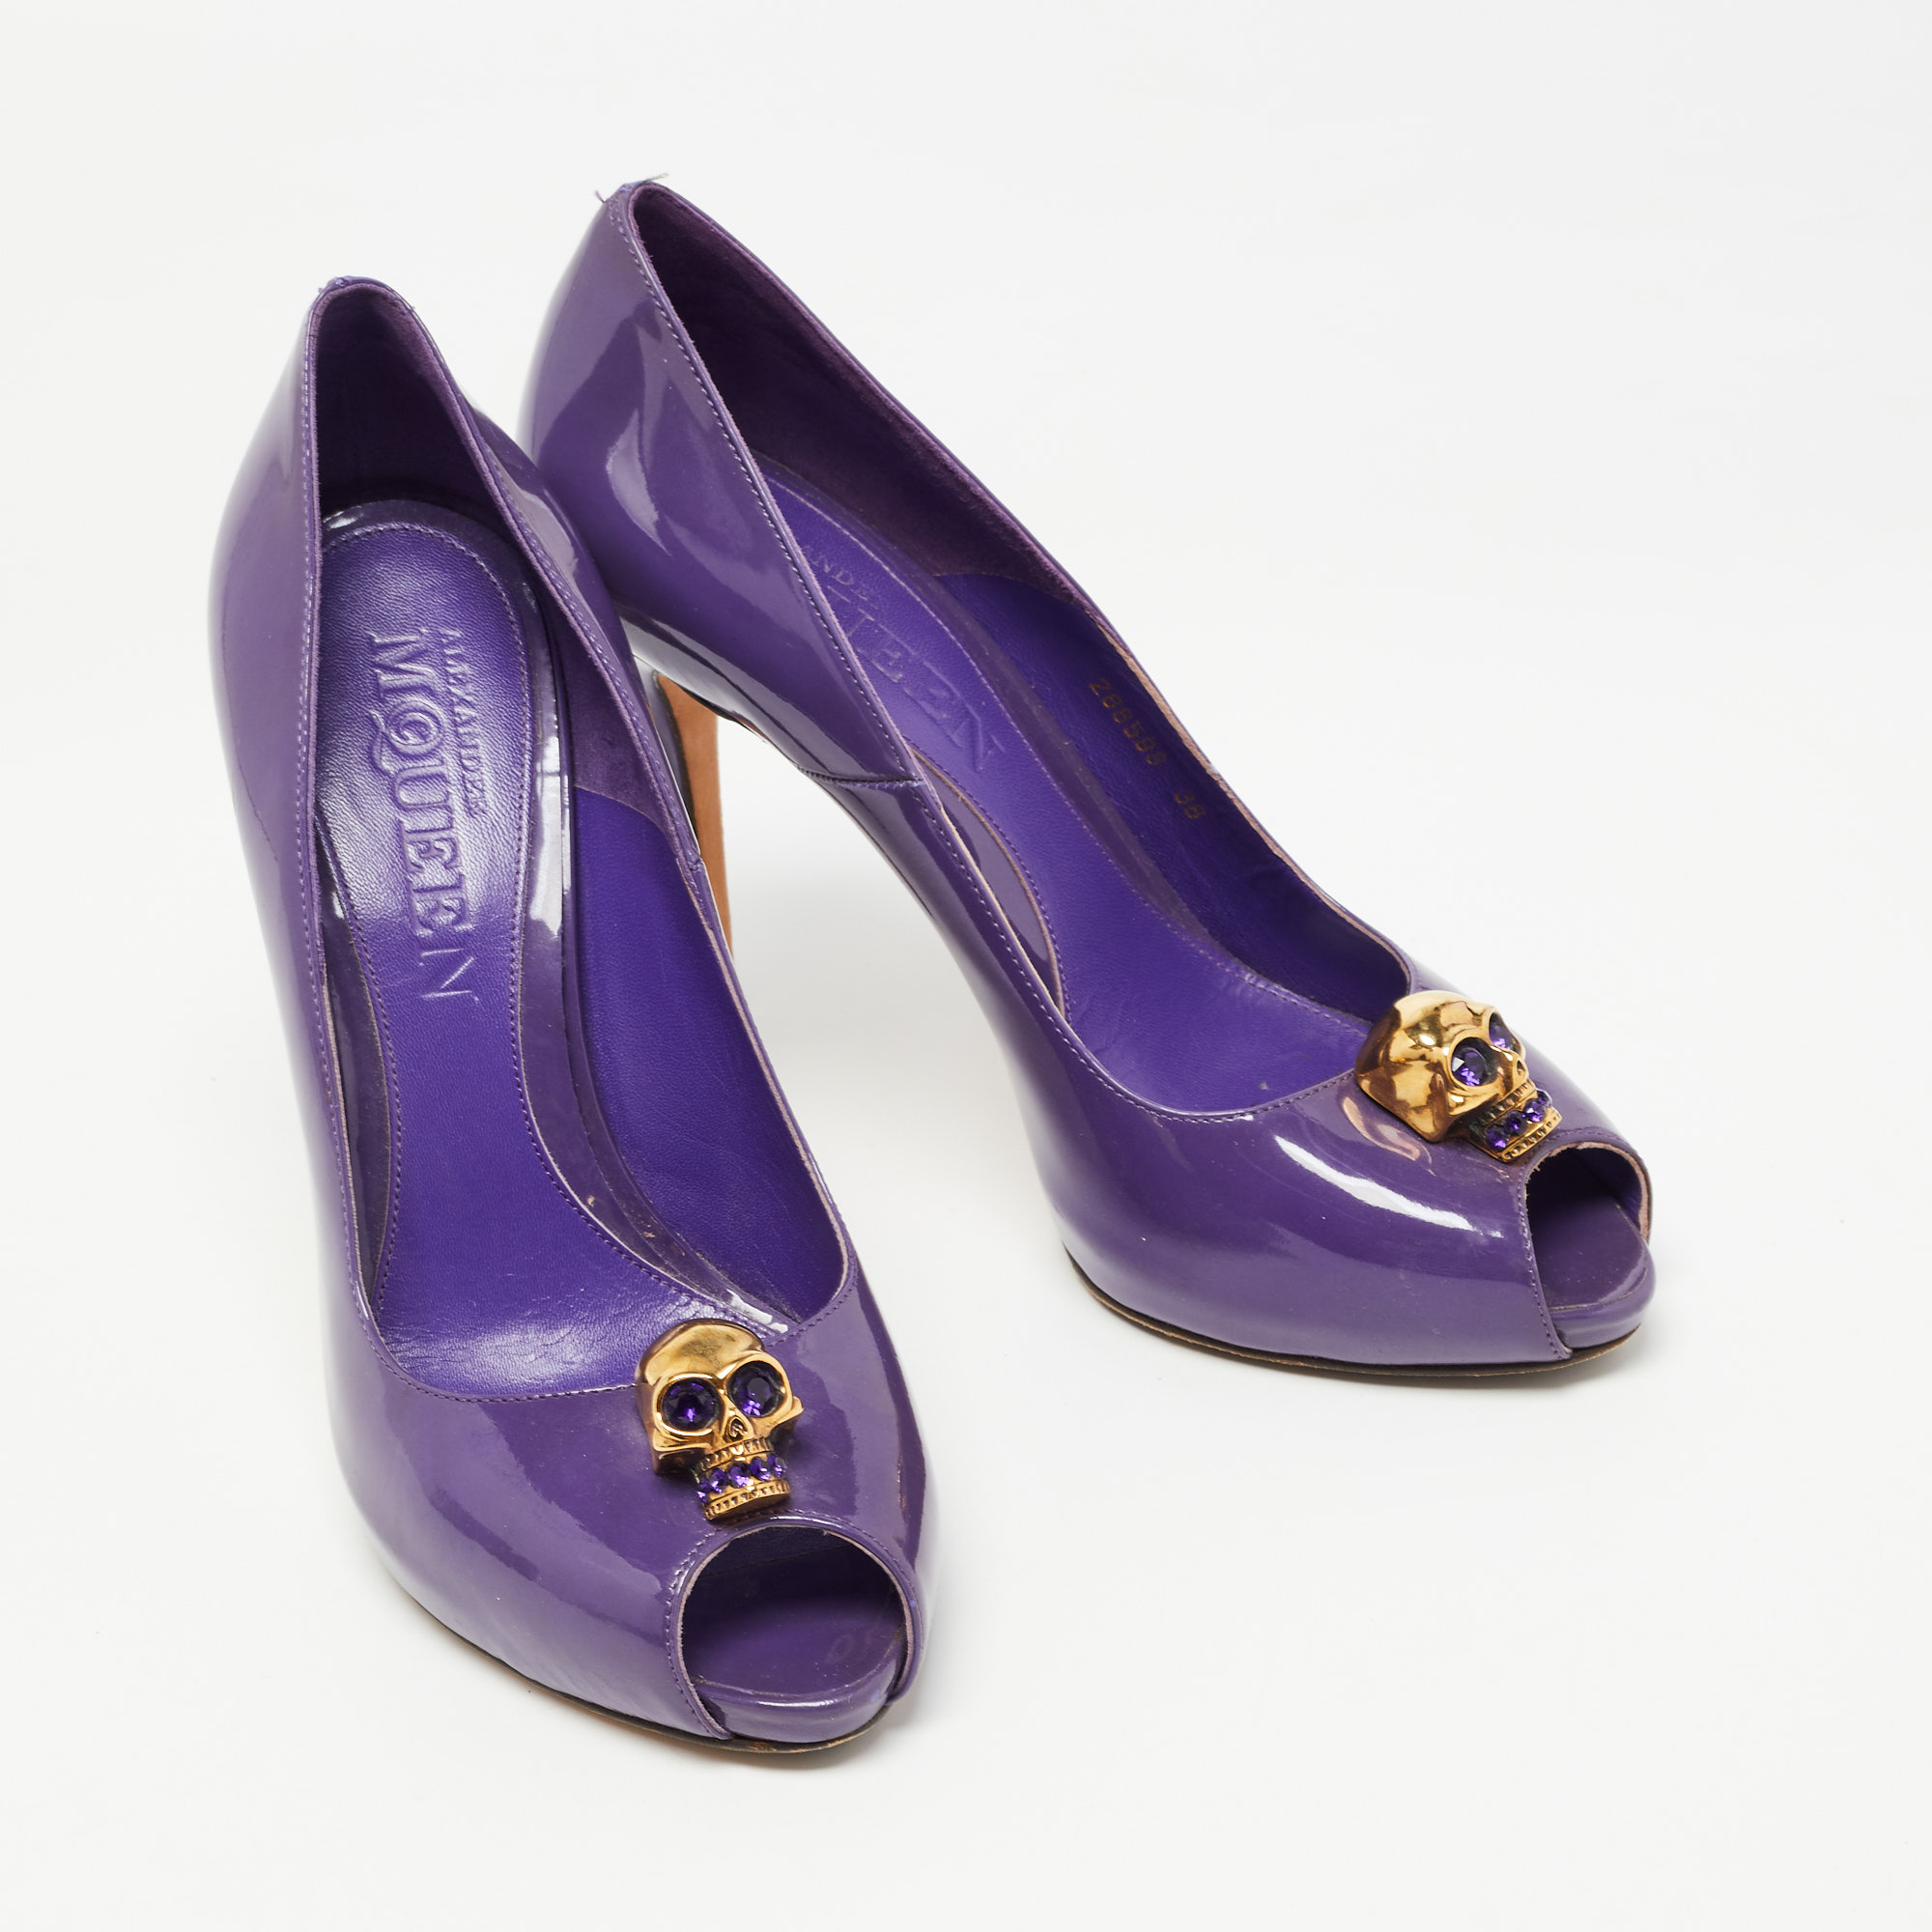 Alexander McQueen Purple Patent Leather Crystal Embellished Skull Peep Toe Pumps Size 38